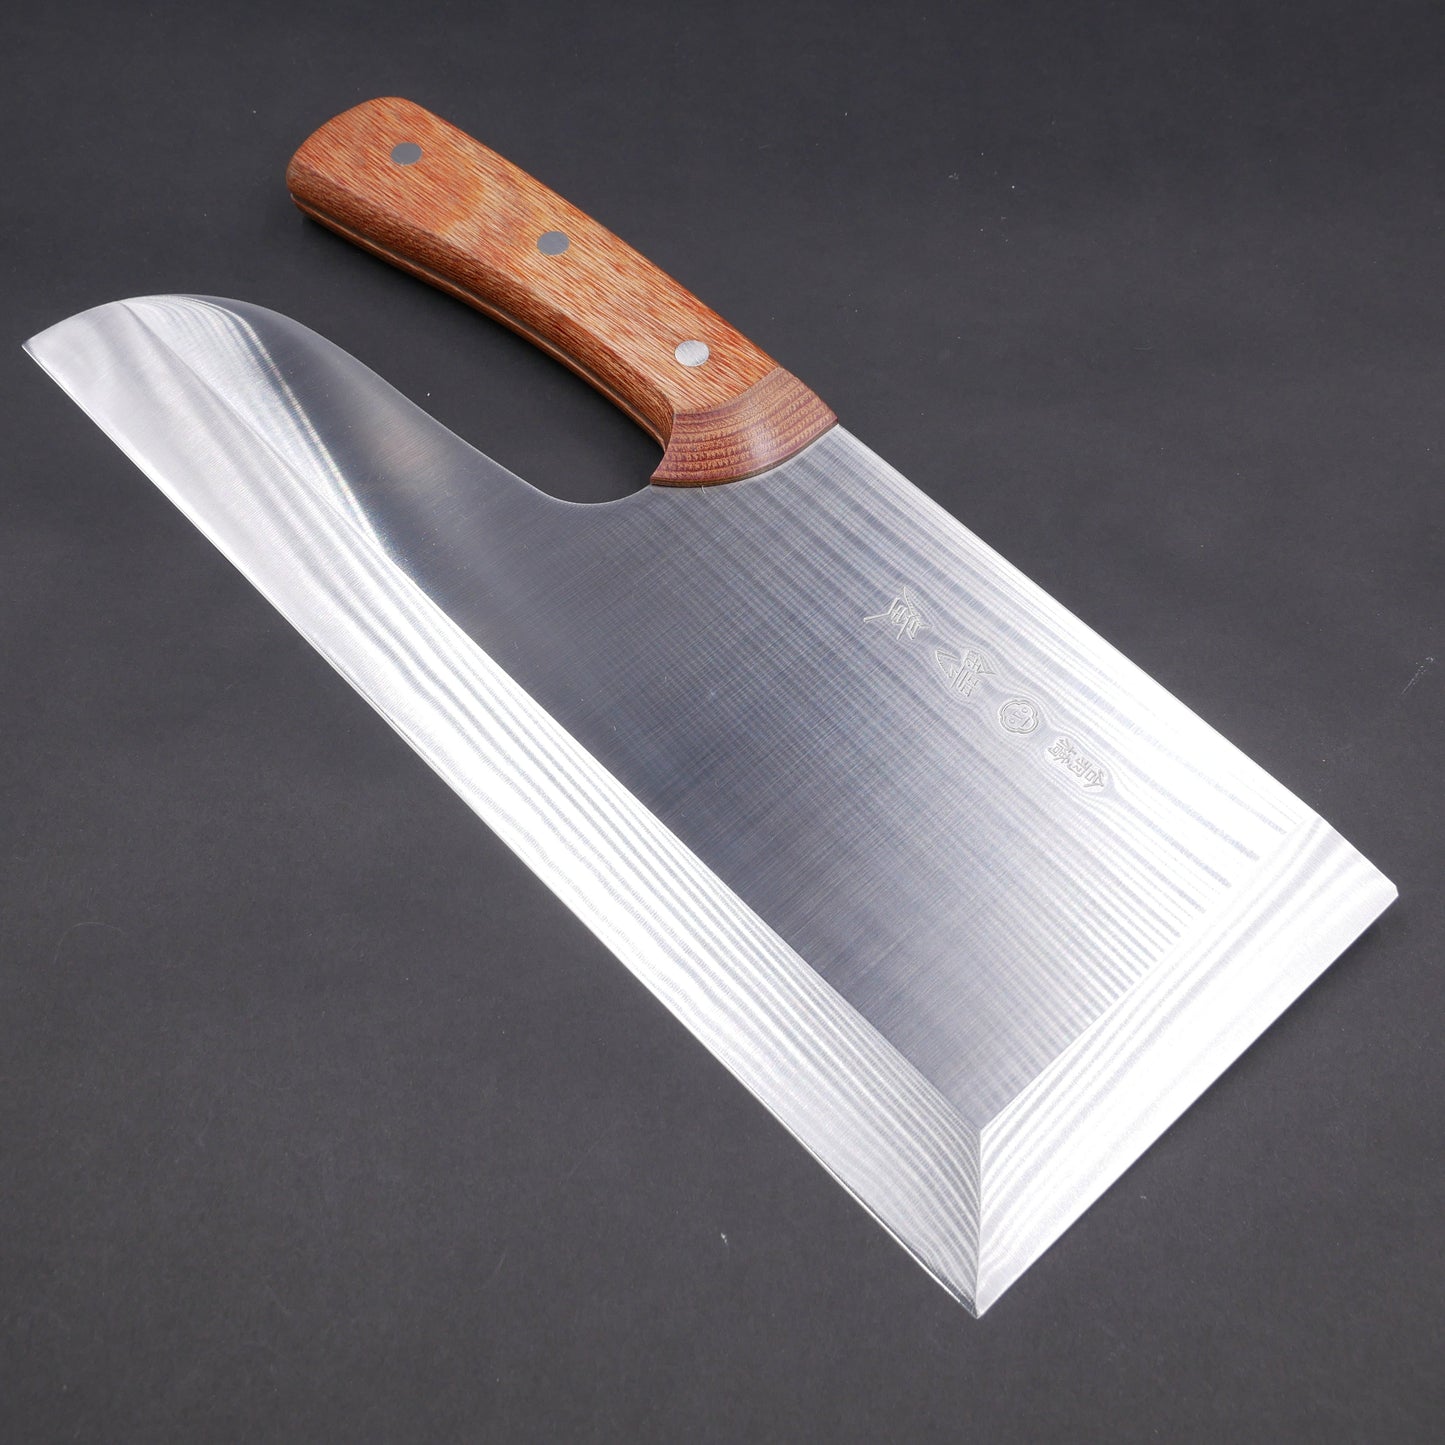 Molybdenum Stainless Steel Noodle Knife